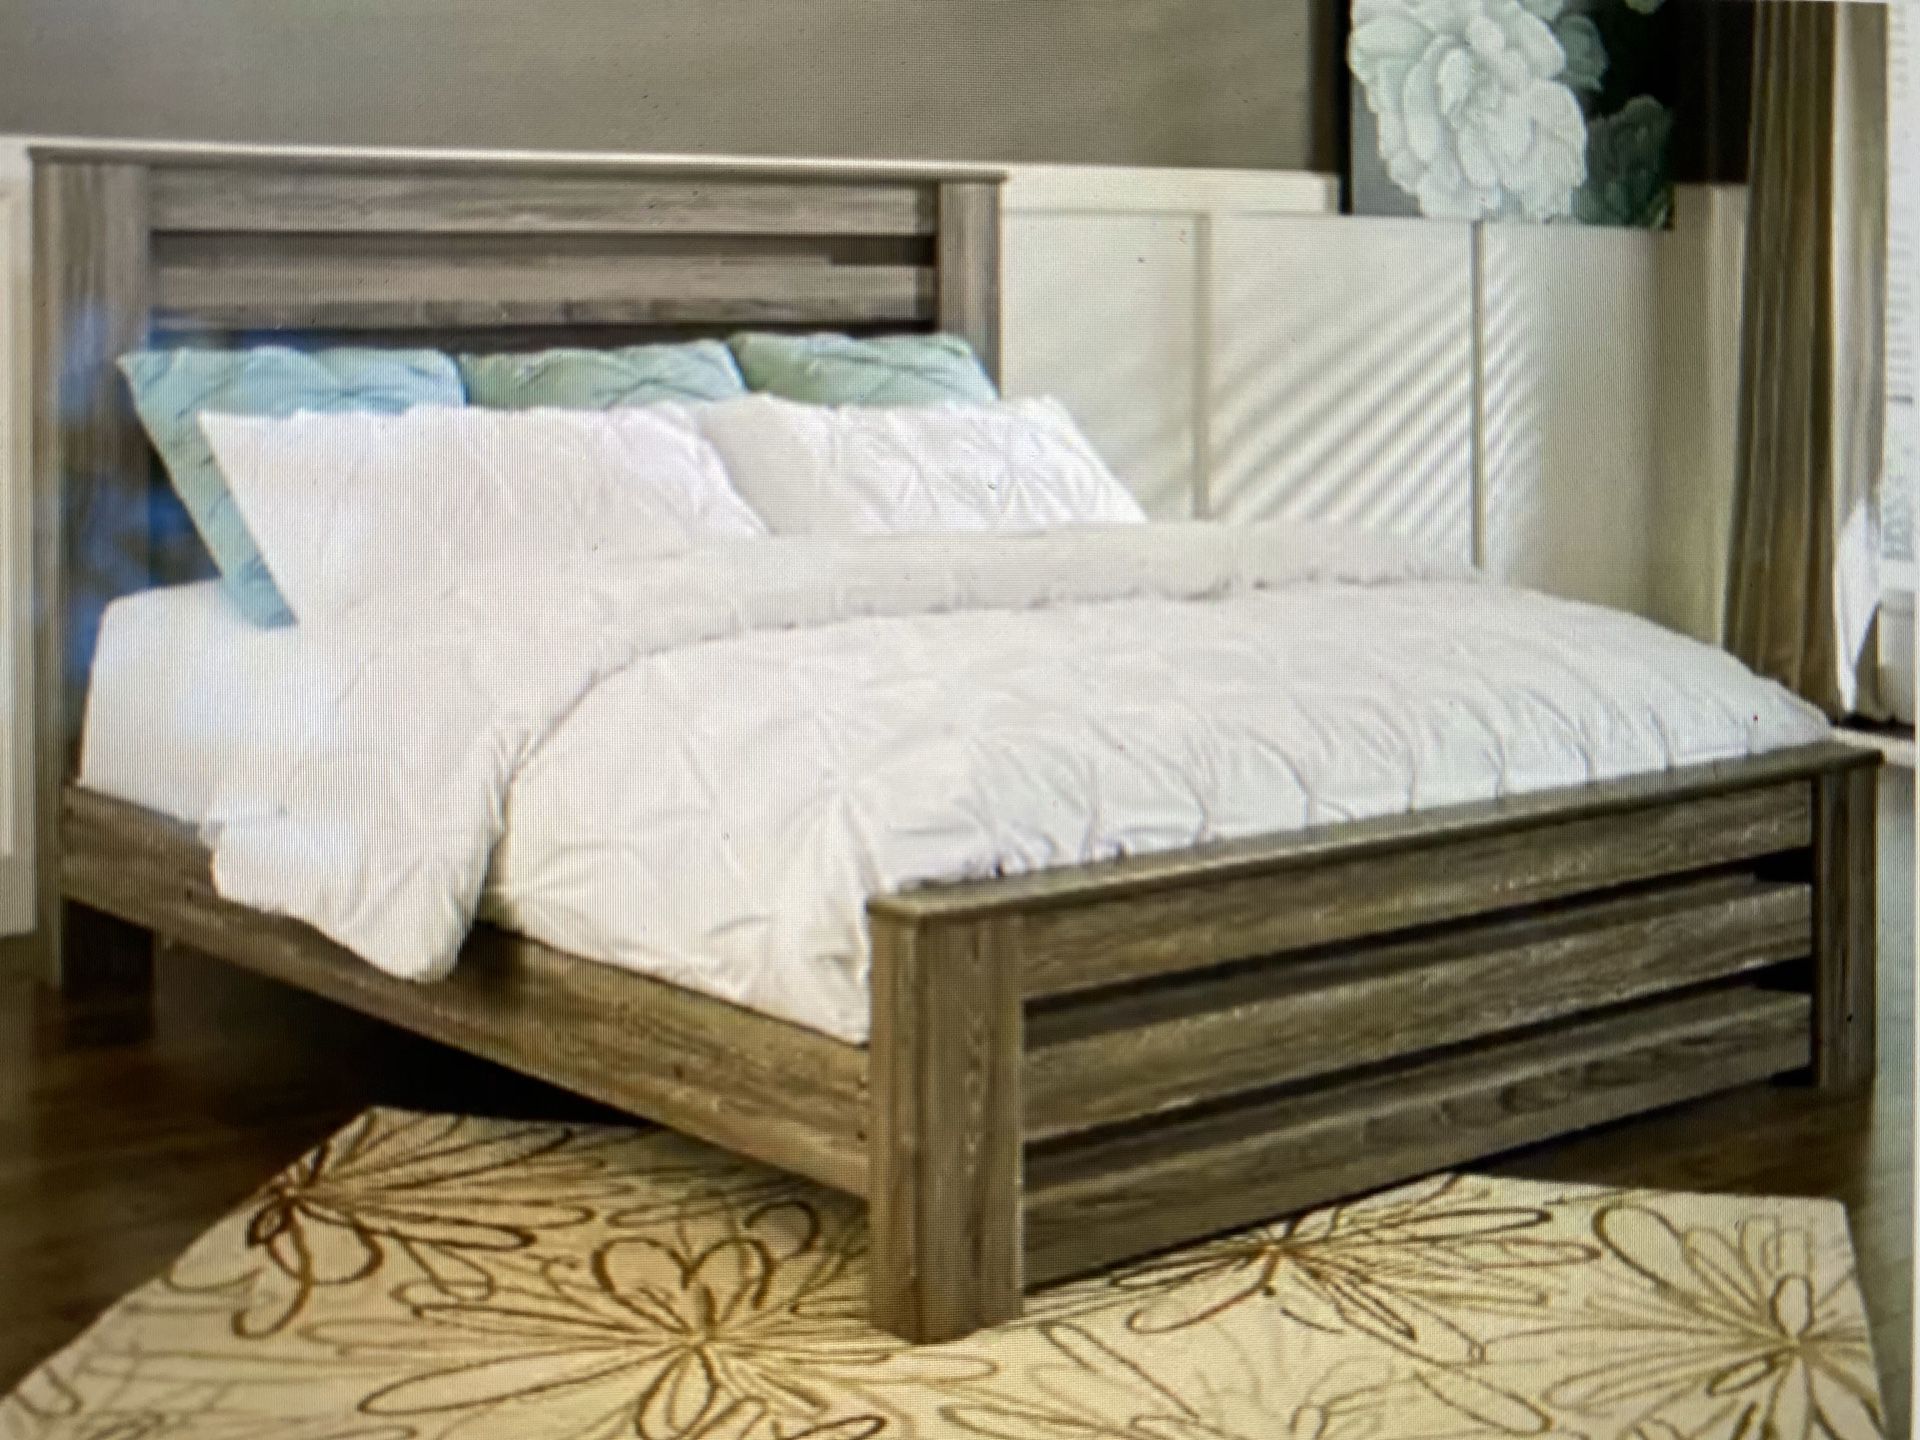 Queen size bedroom set from Ashely’s.